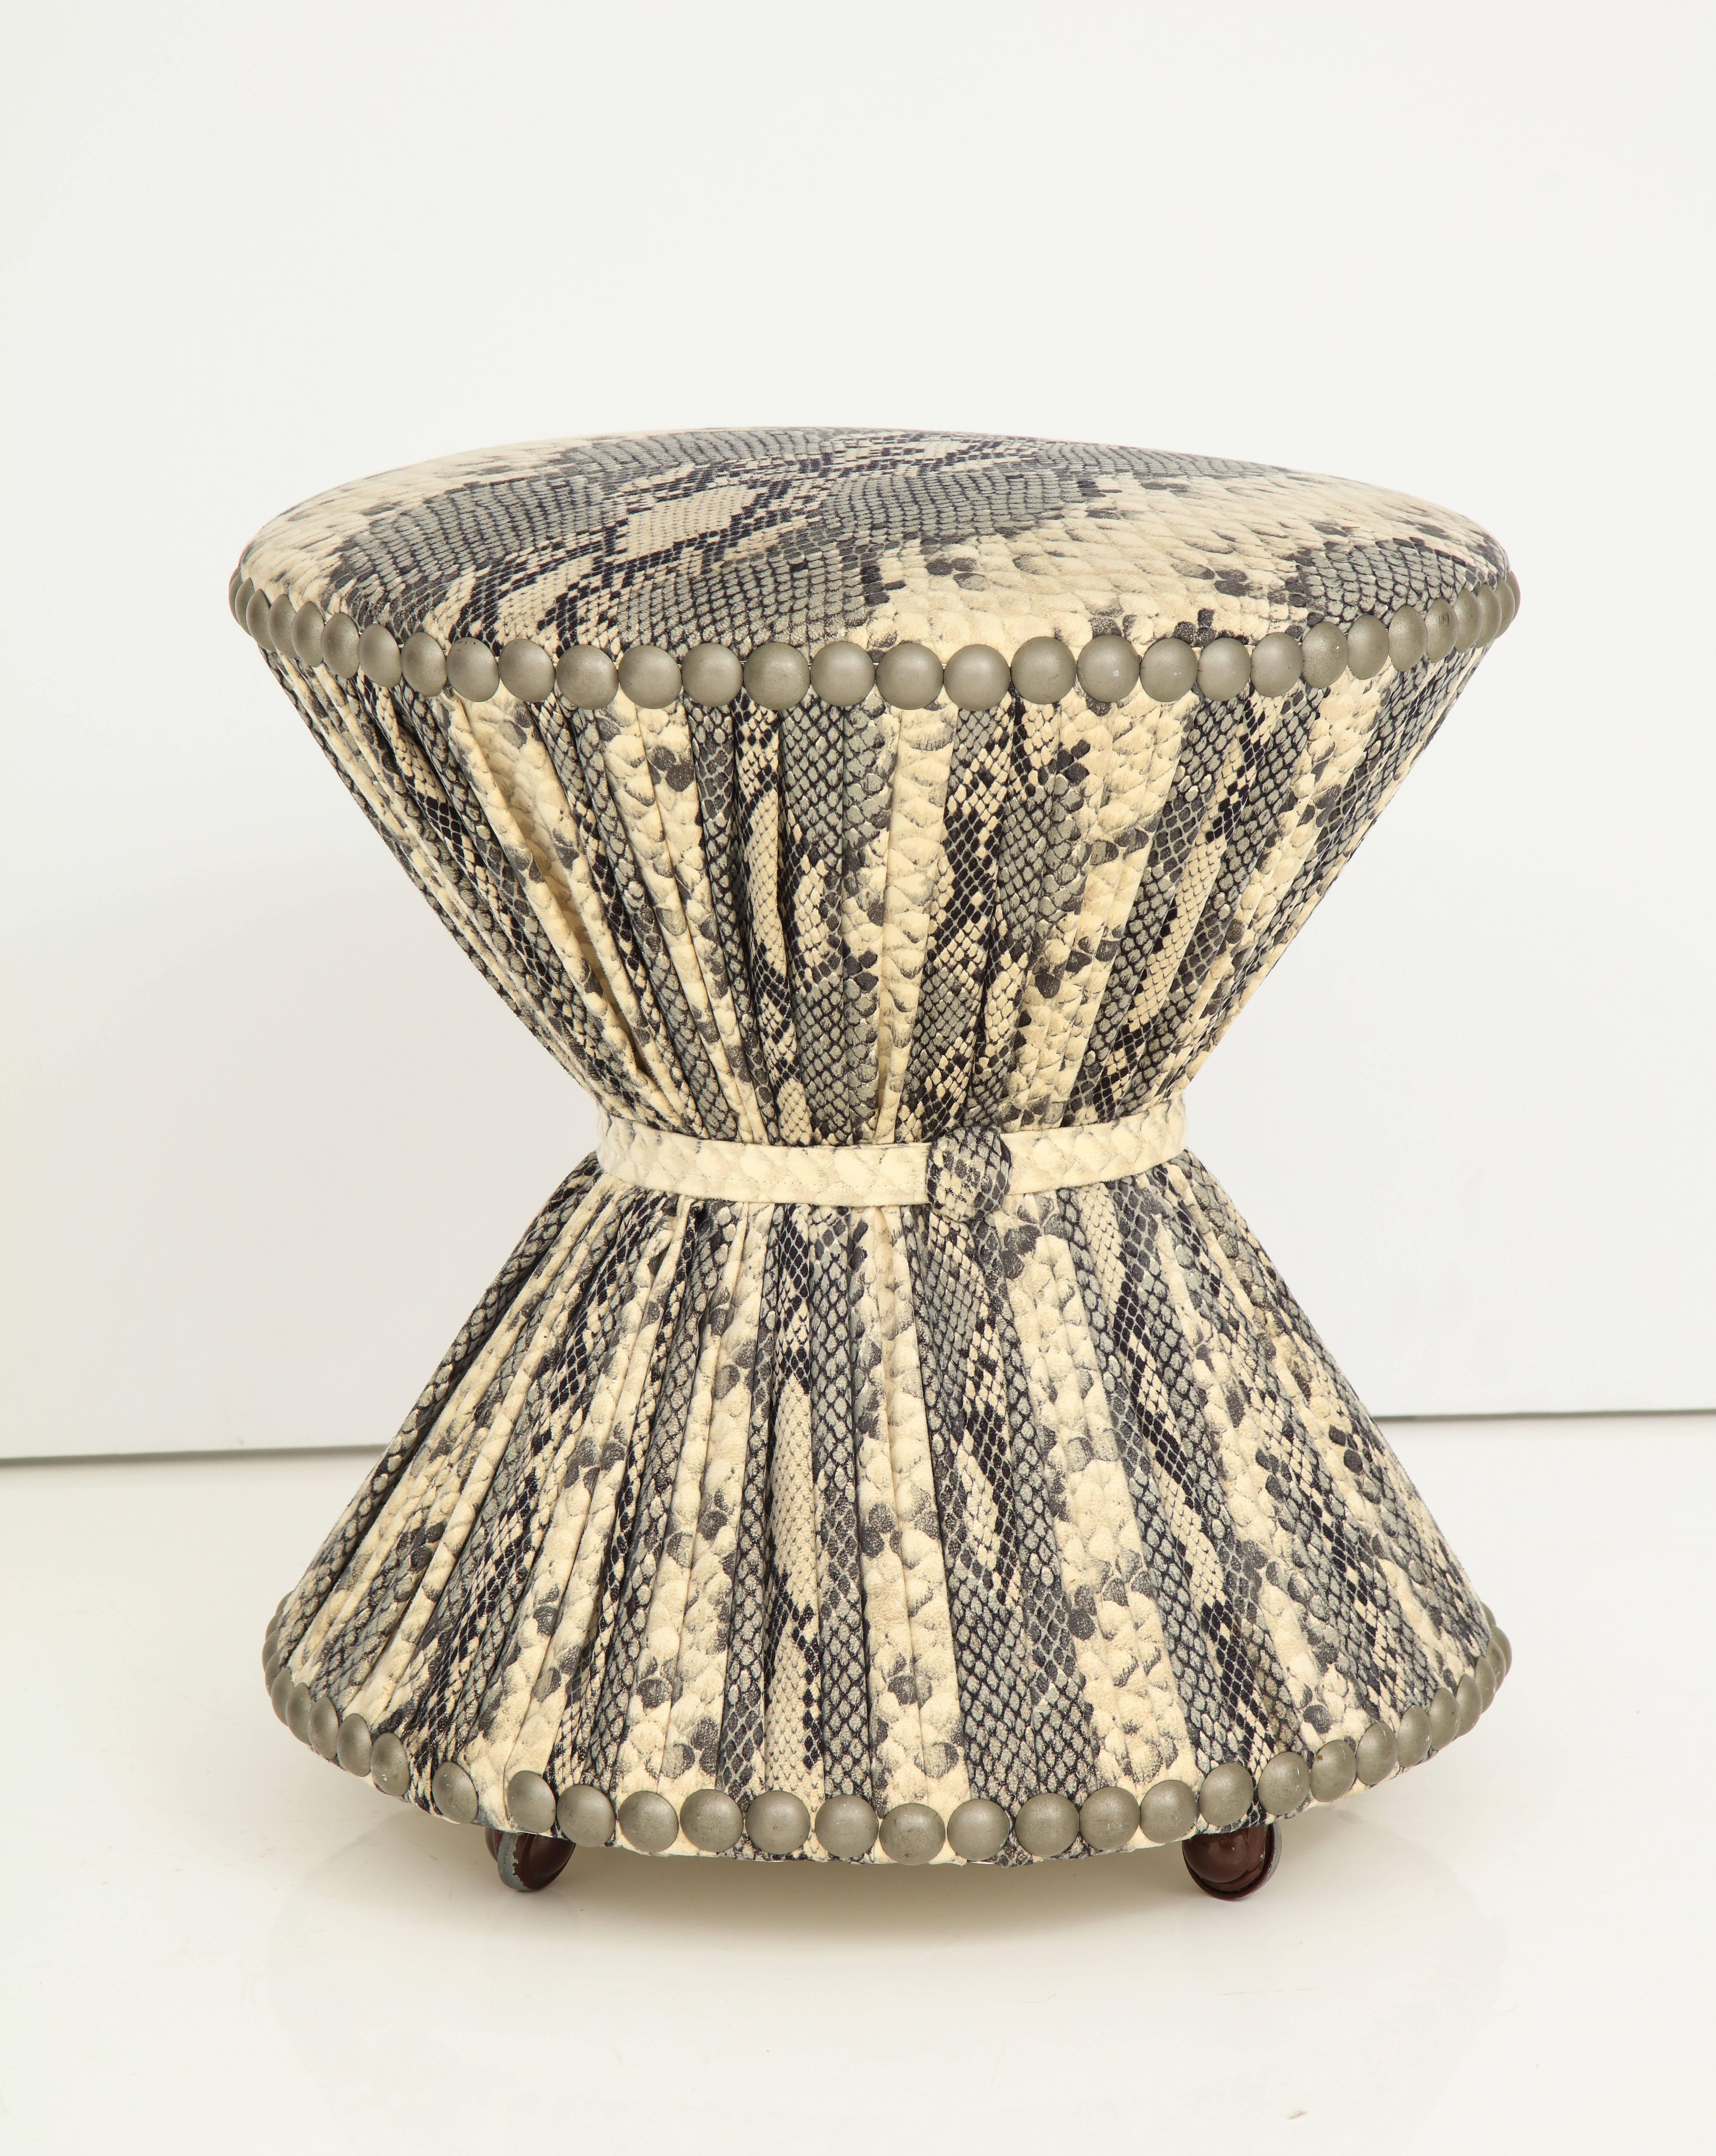 American Snakeskin Printed Fabric Stool on Casters with Studded Trim